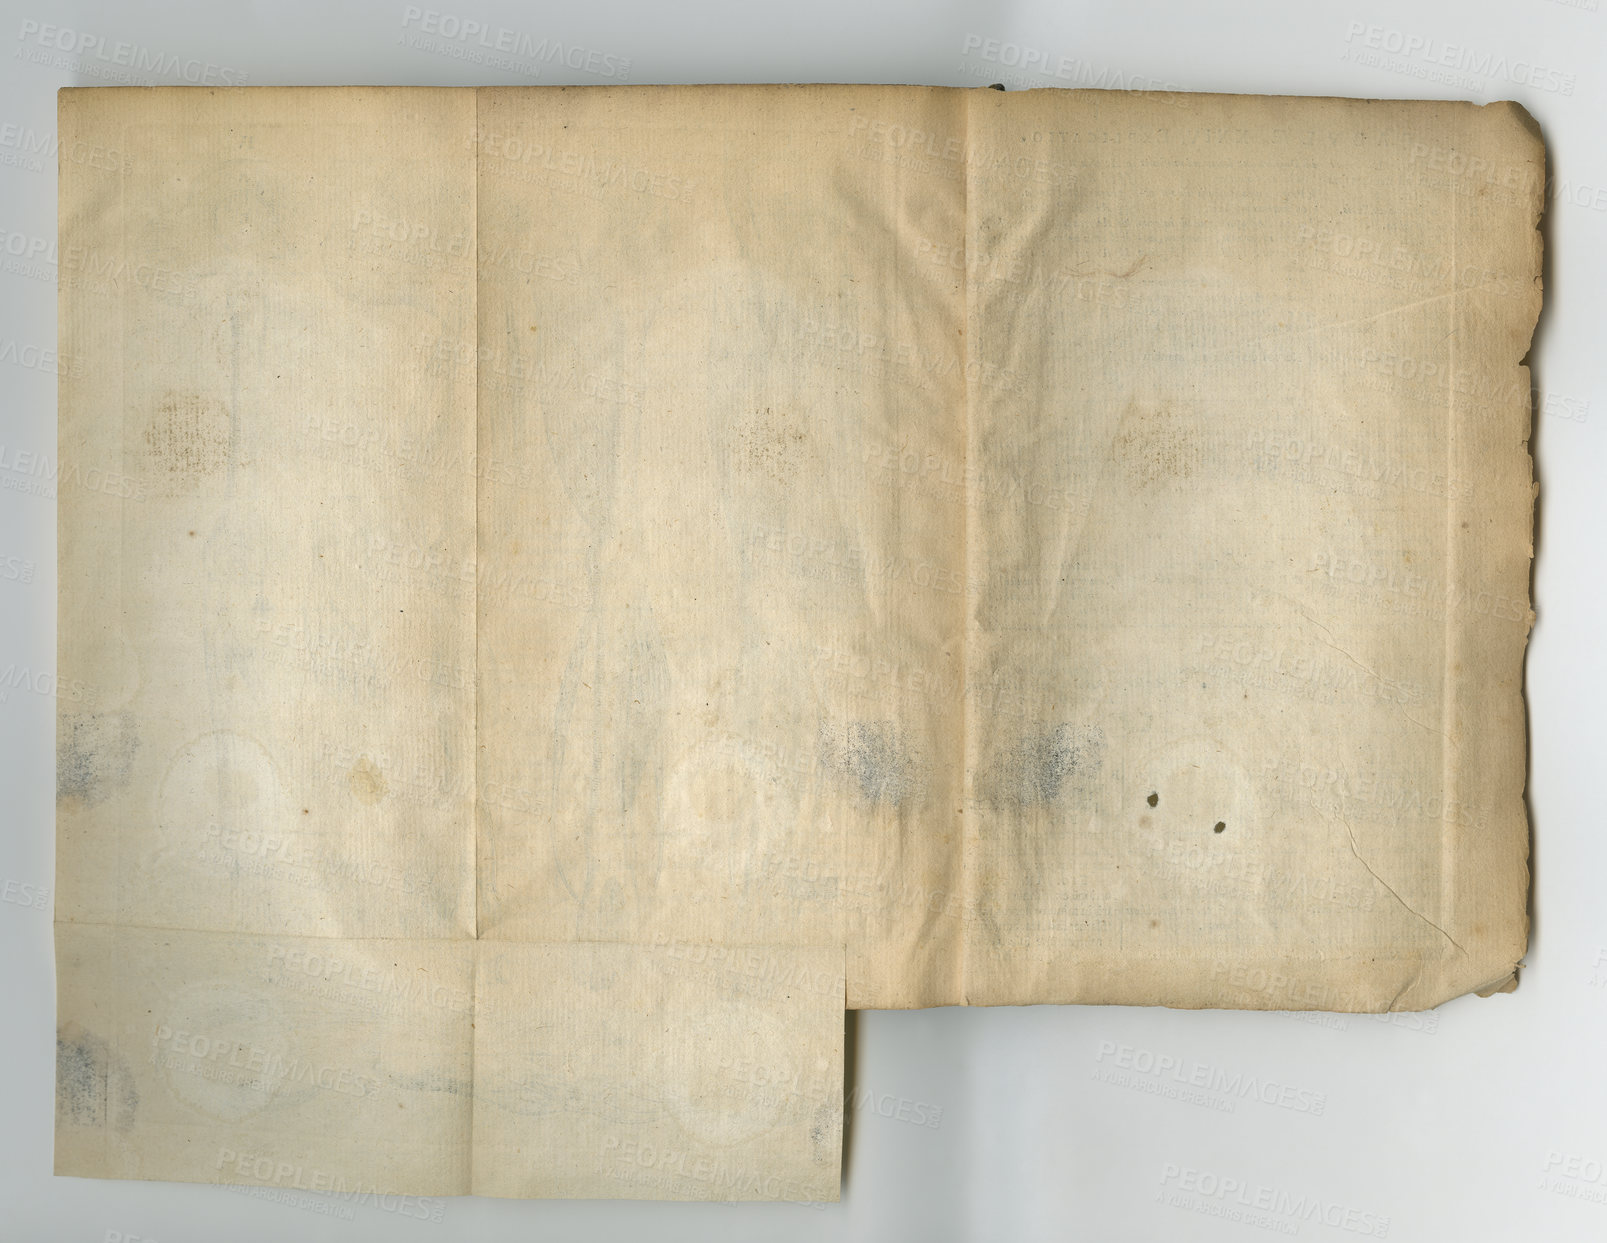 Buy stock photo Old, vintage and blank page of parchment, manuscript or history artifact for scripture or literature against a studio background. Closeup of empty historical novel, journal or worn paper for research